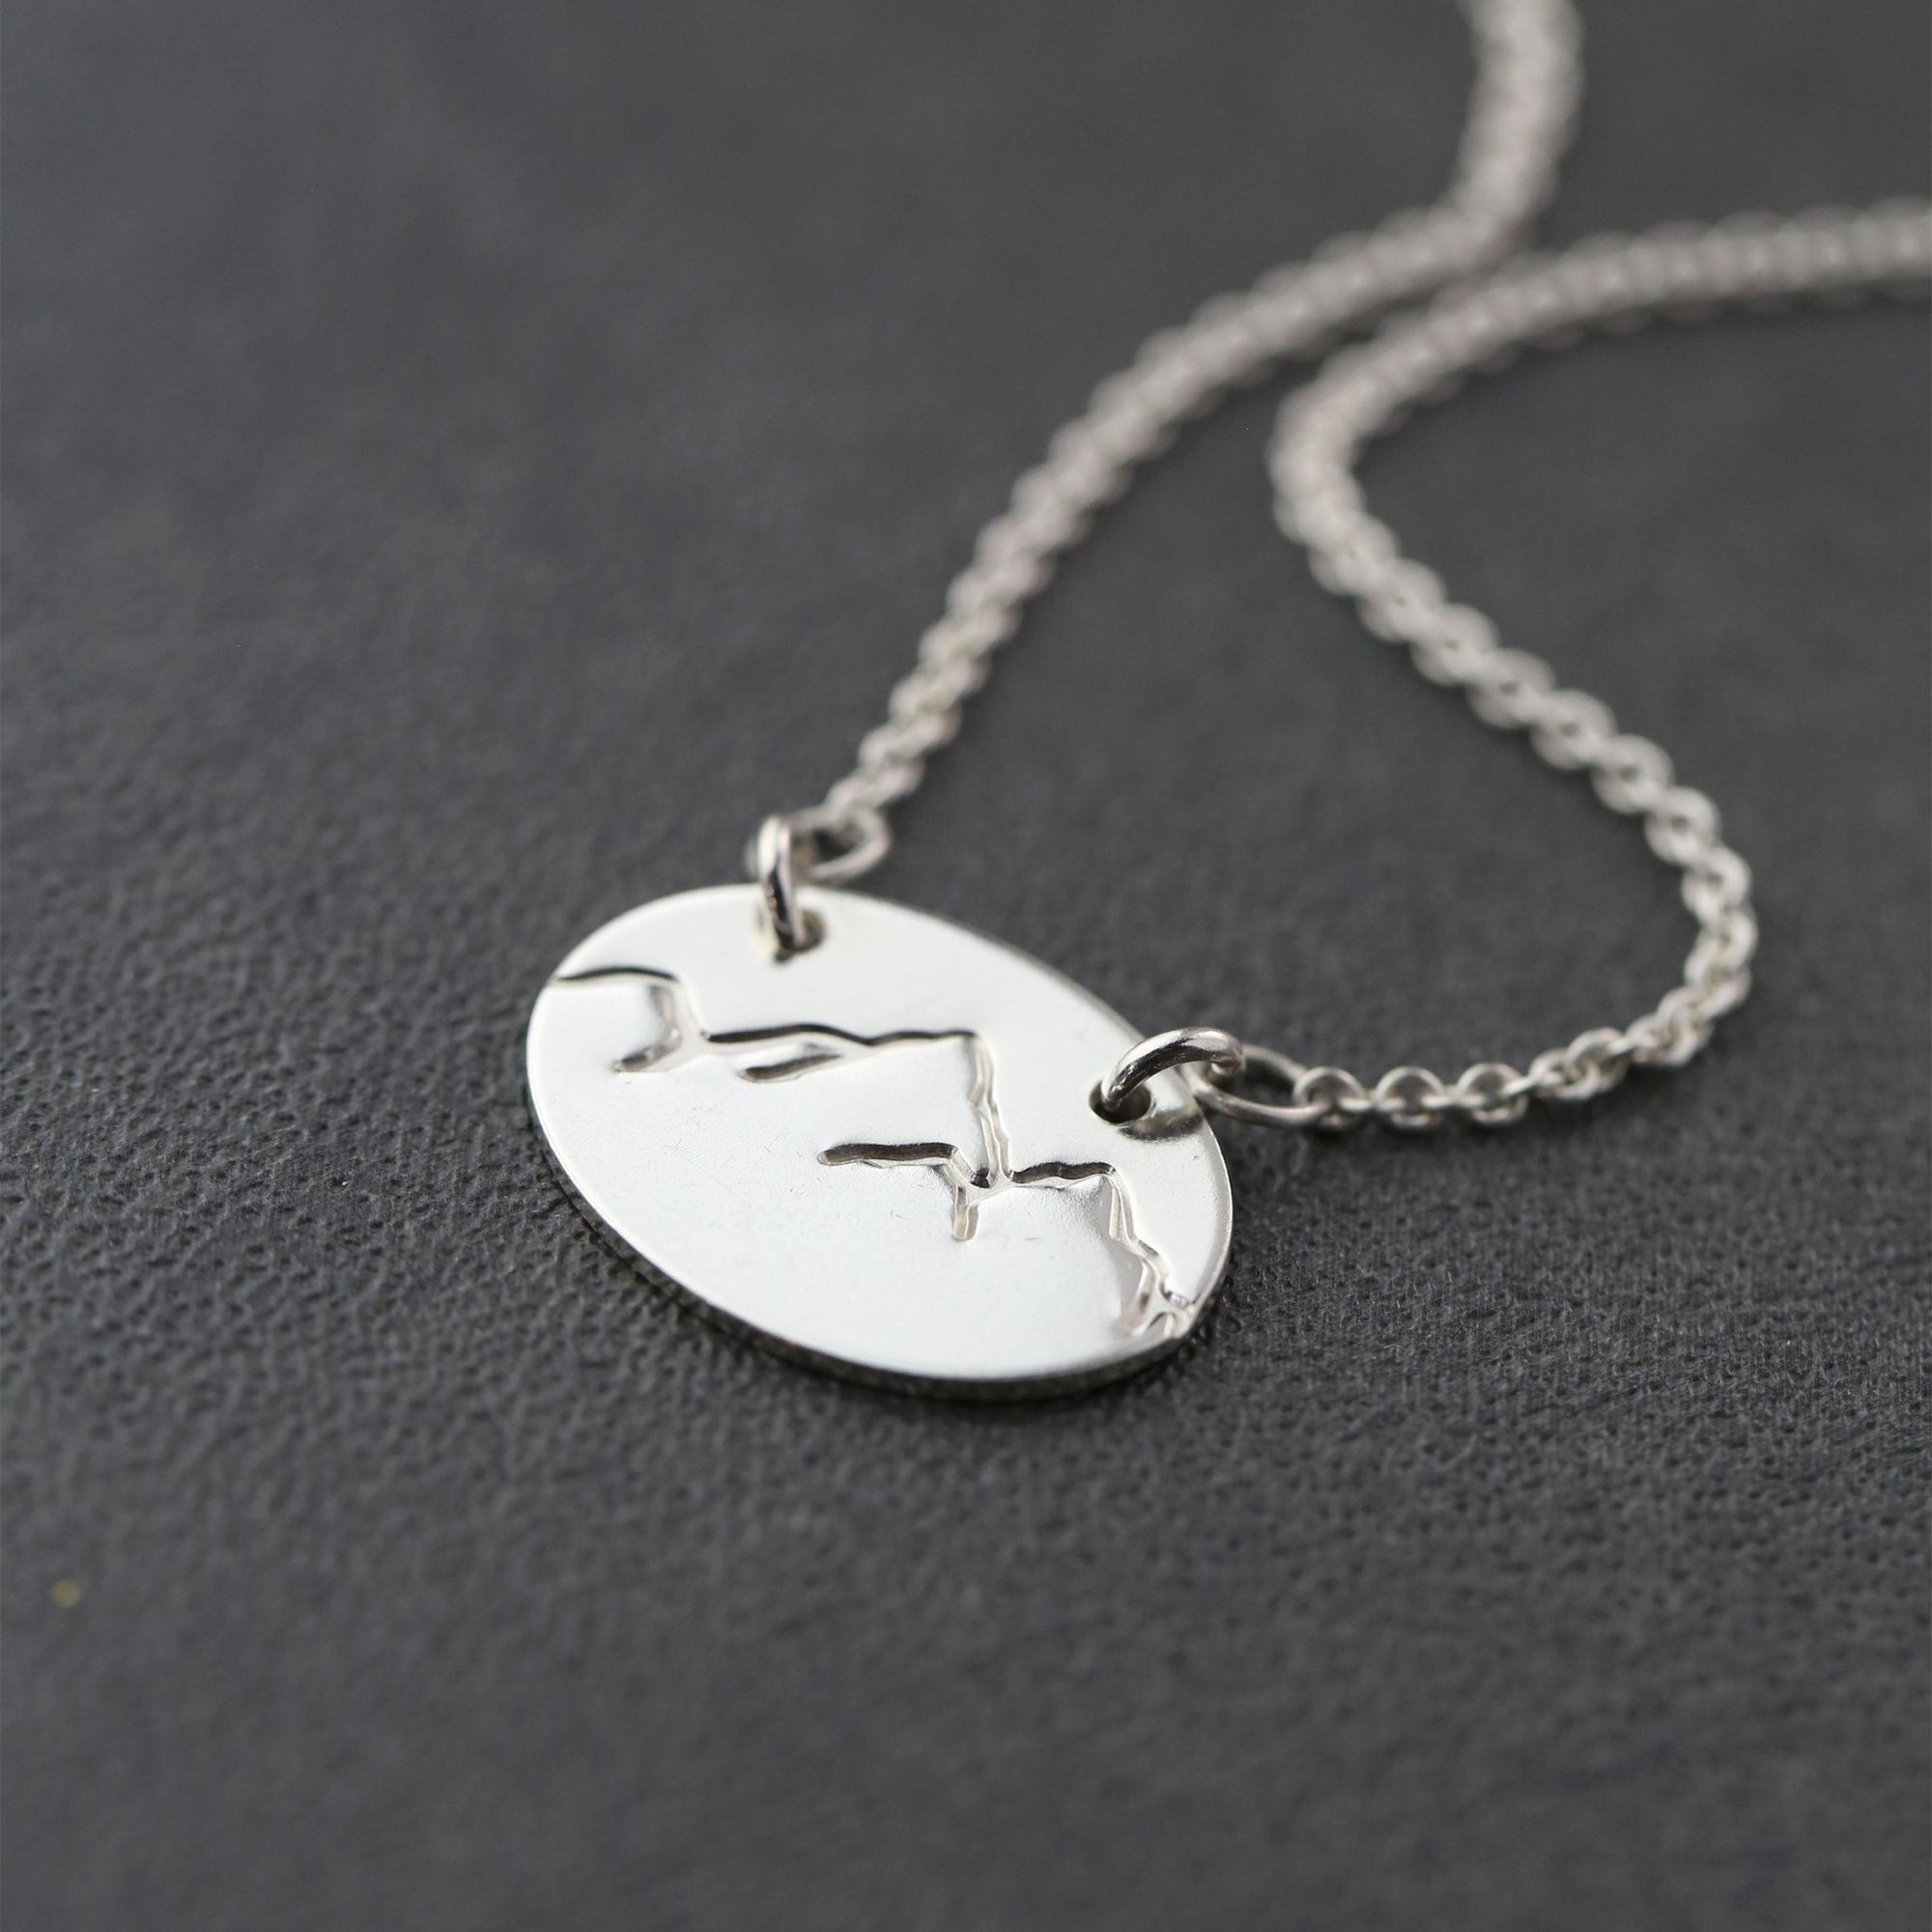 Hand Stamped Mountain Necklace